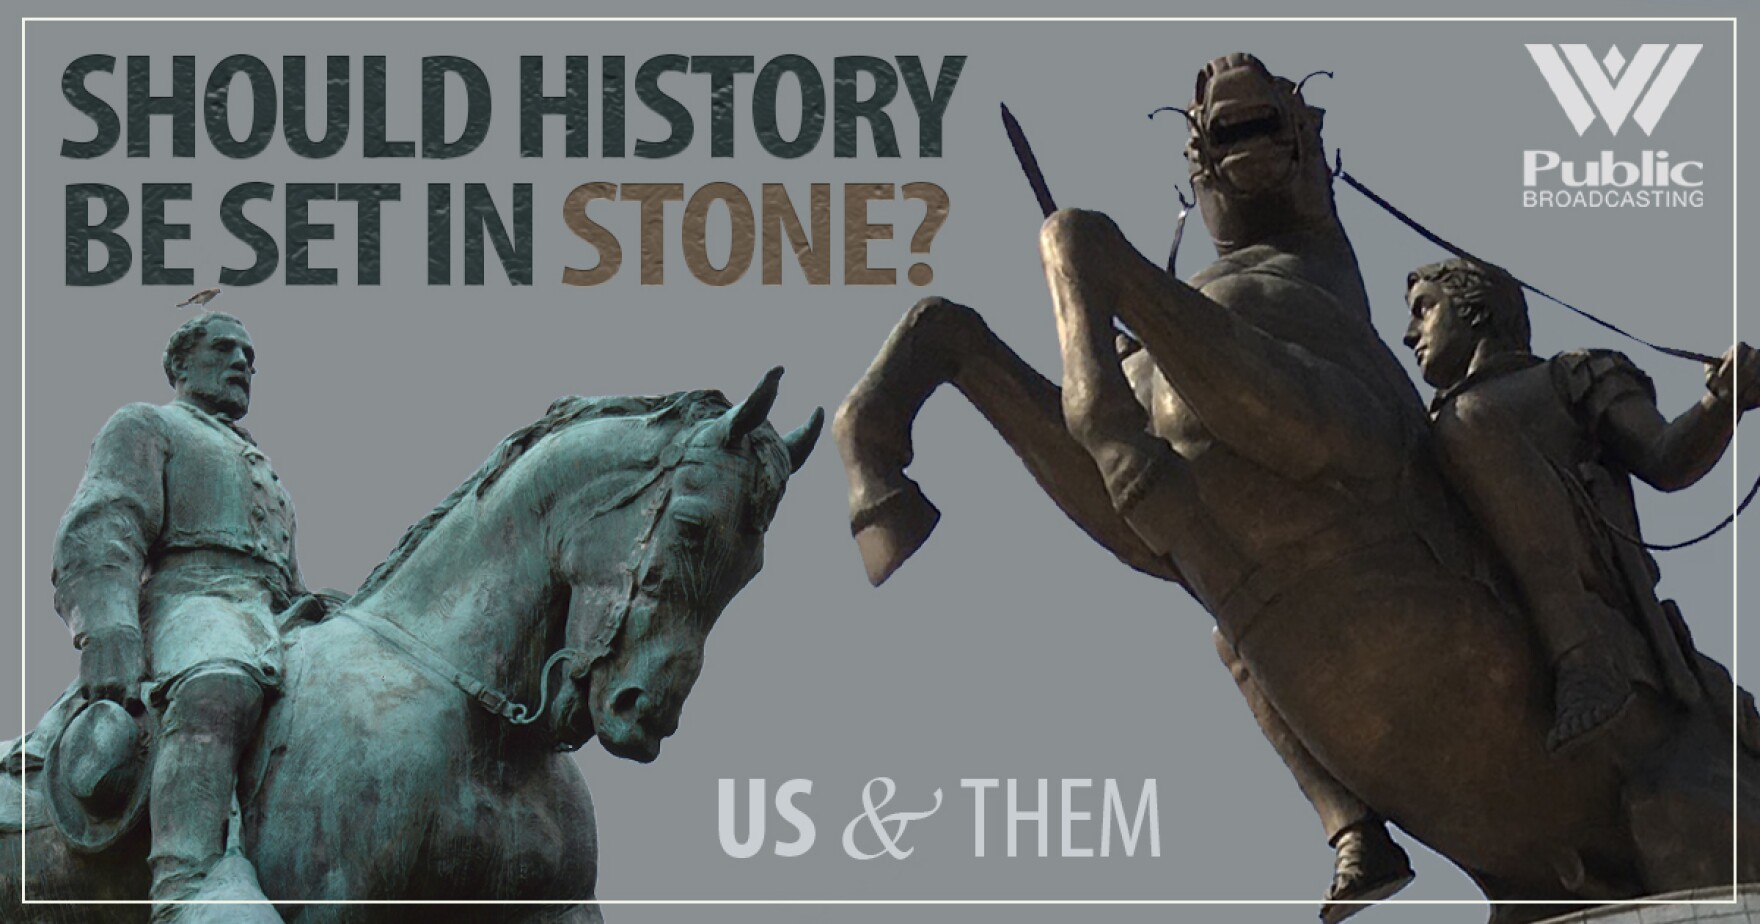 Us & Them: Should History Be Set In Stone?